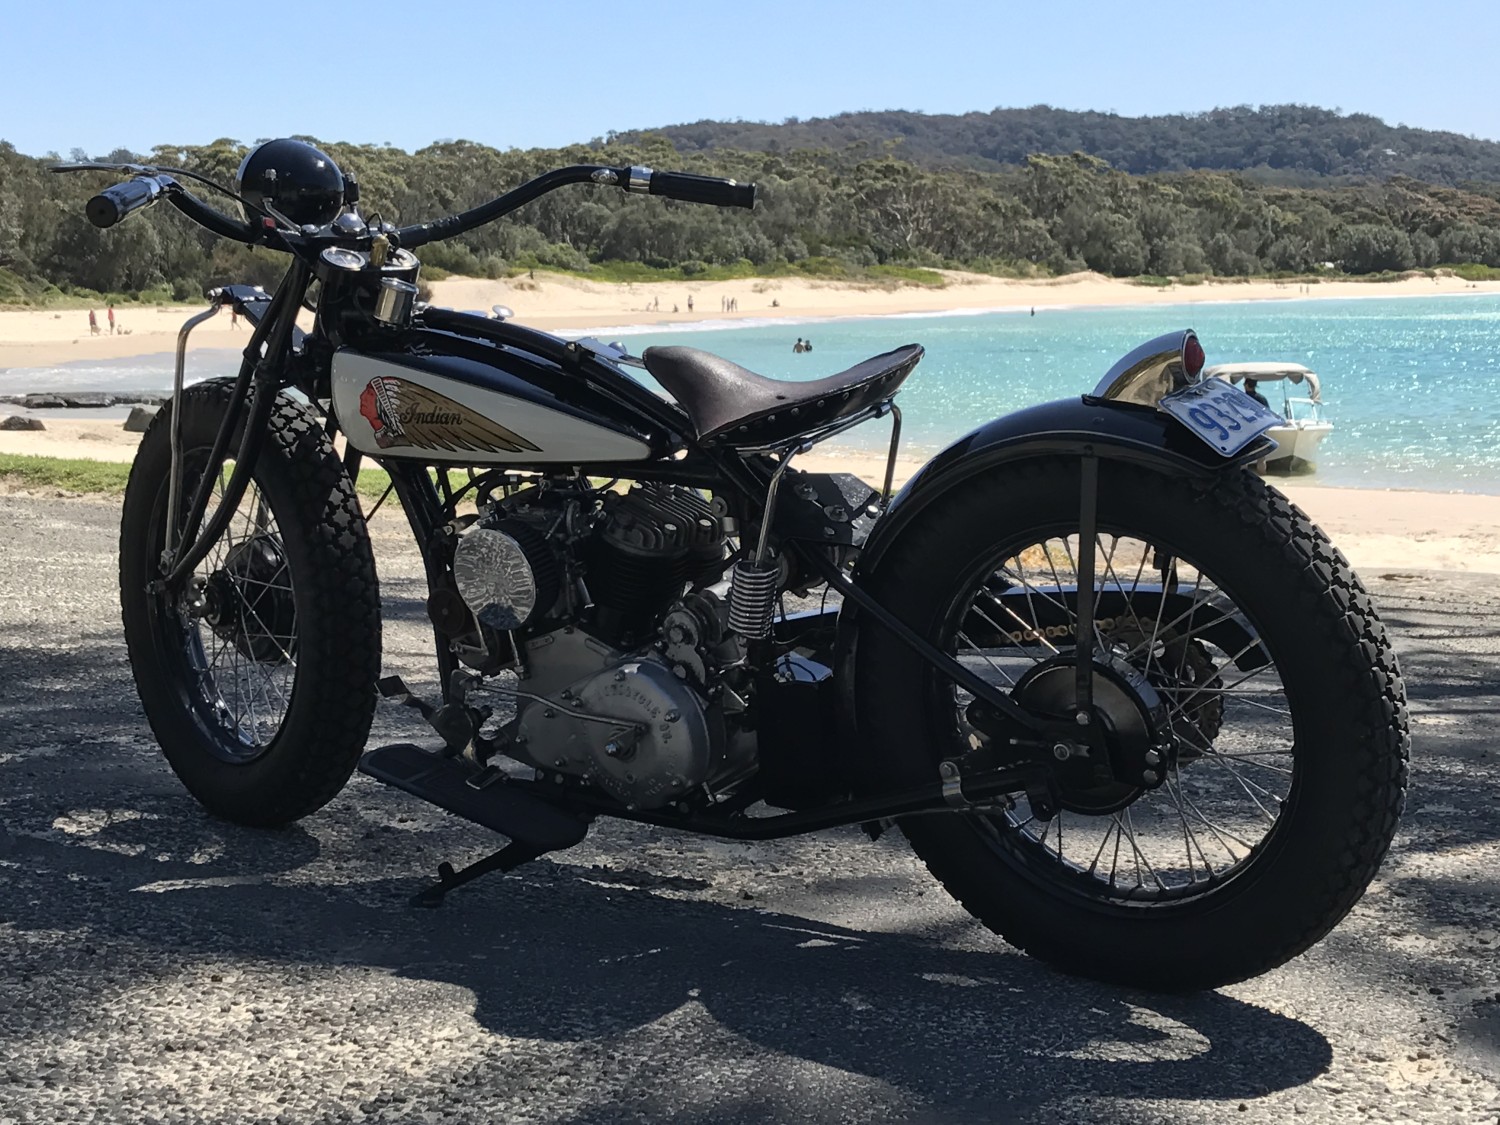 1929 Indian 101 scout